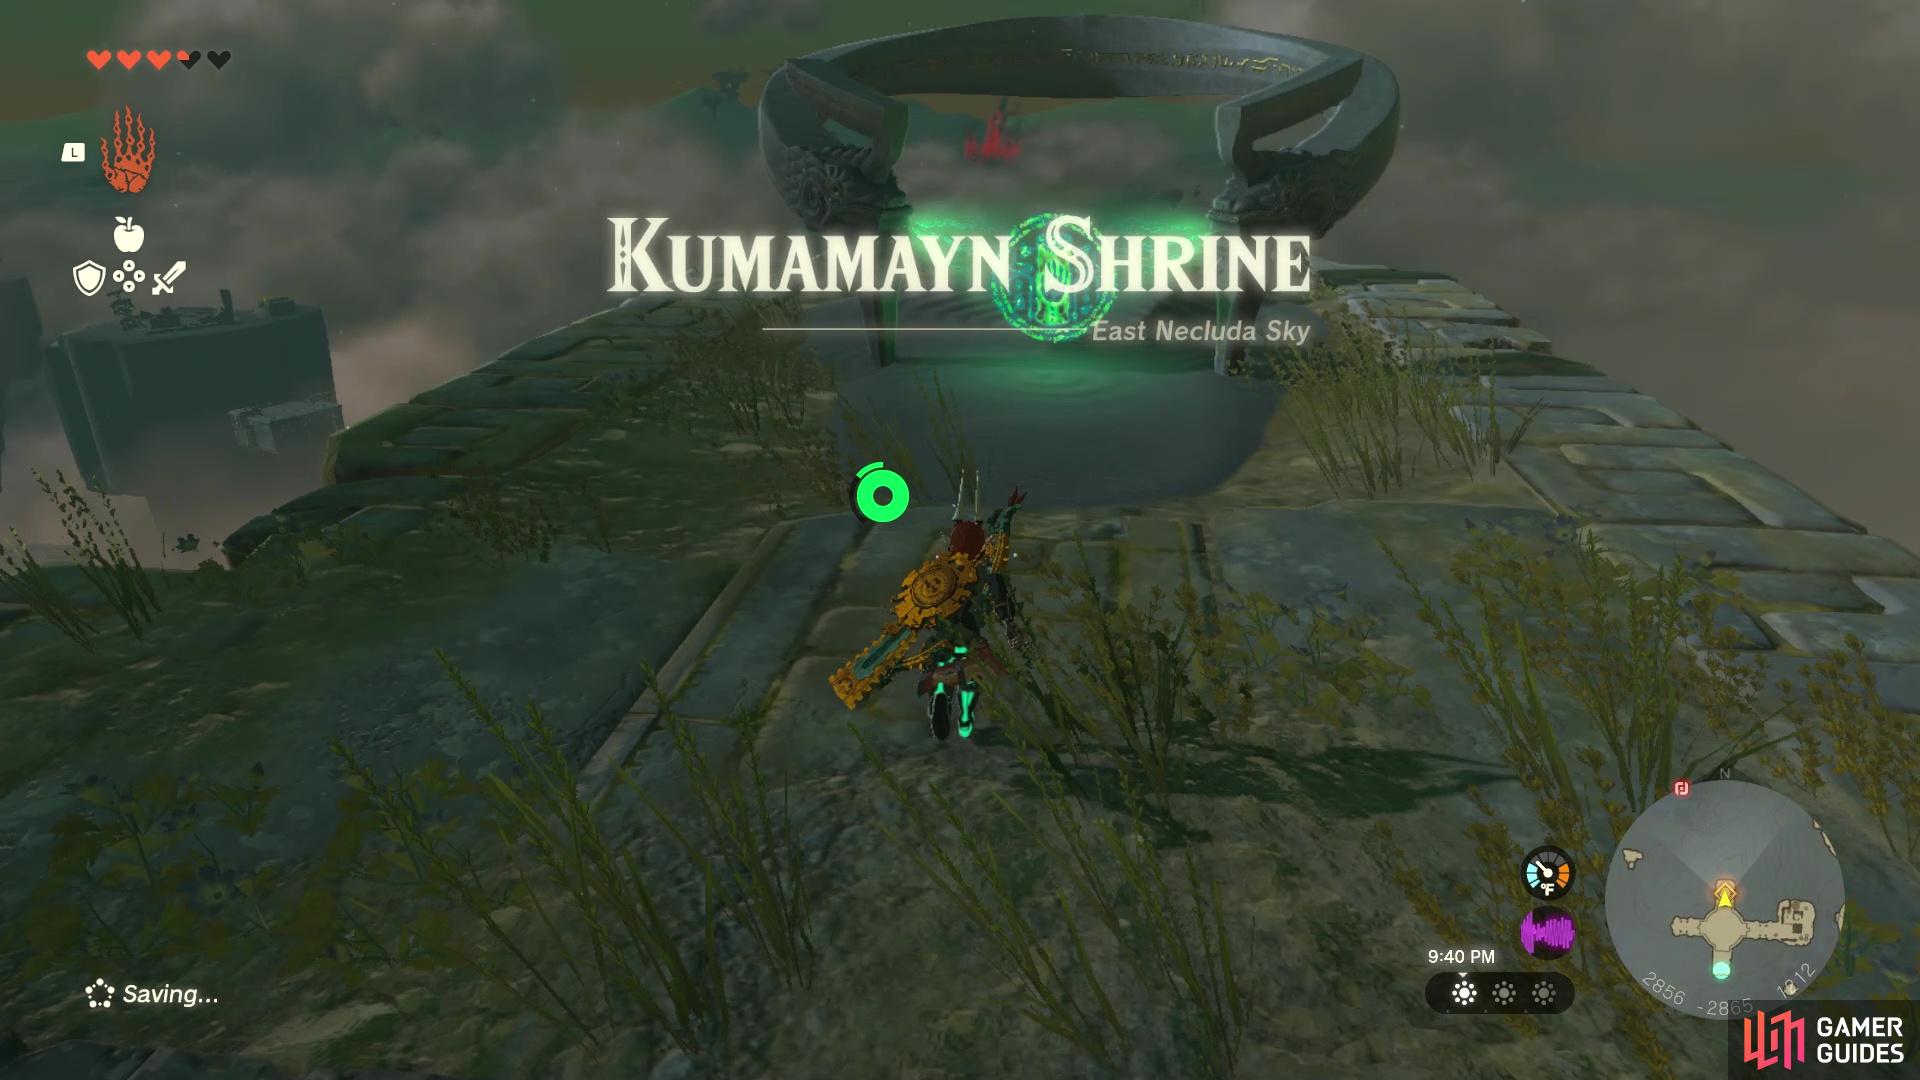 The Kumamayn Shrine will require you to do a little quest to open it